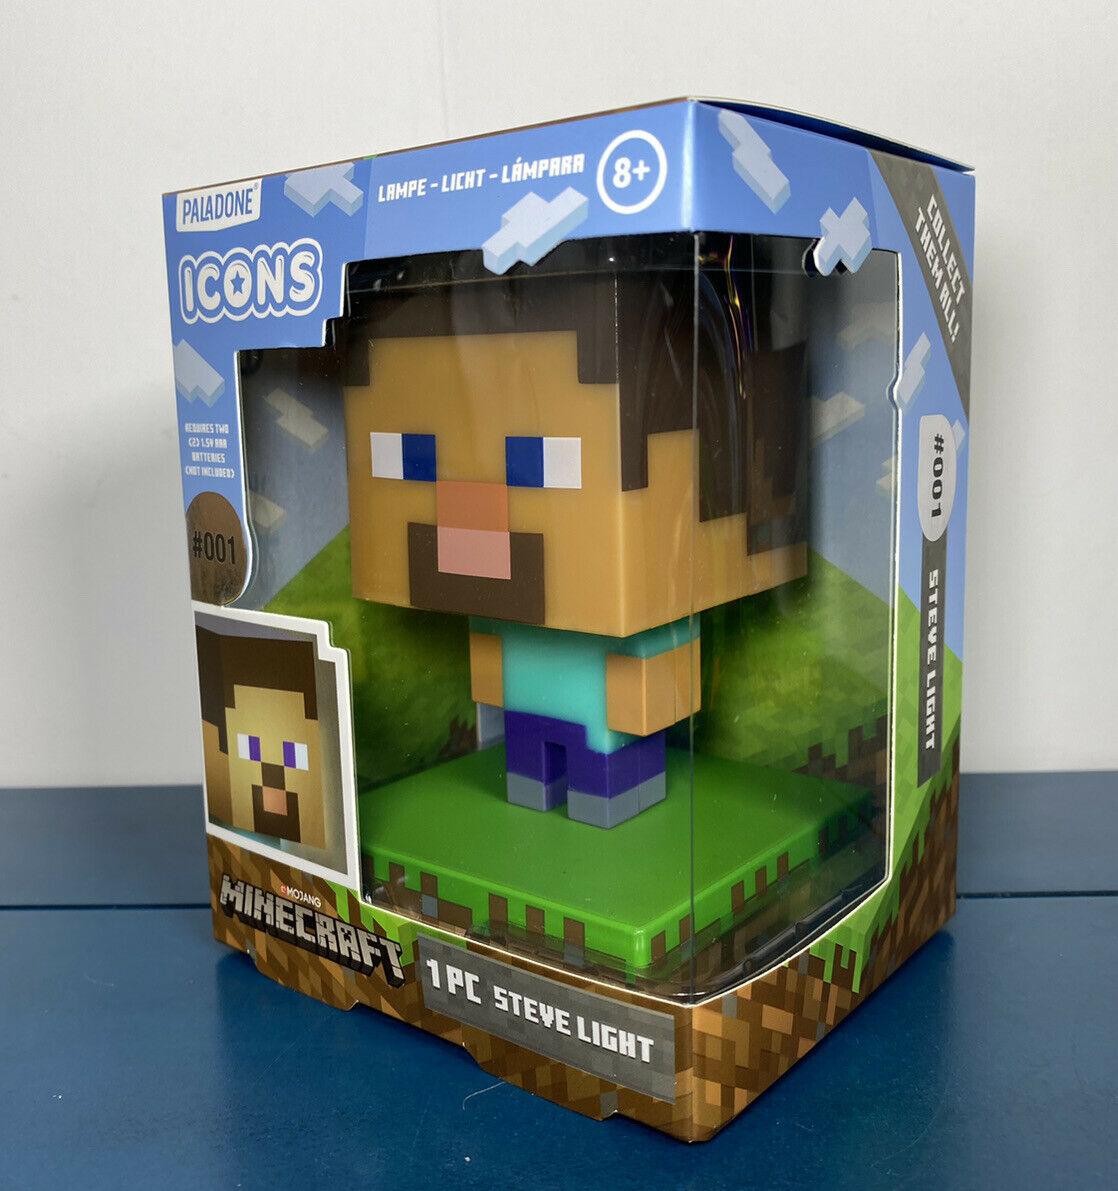 Night – Paladone Toy ICONS Lamp 3D Figure Florida - Steve Light Character Minecraft Store